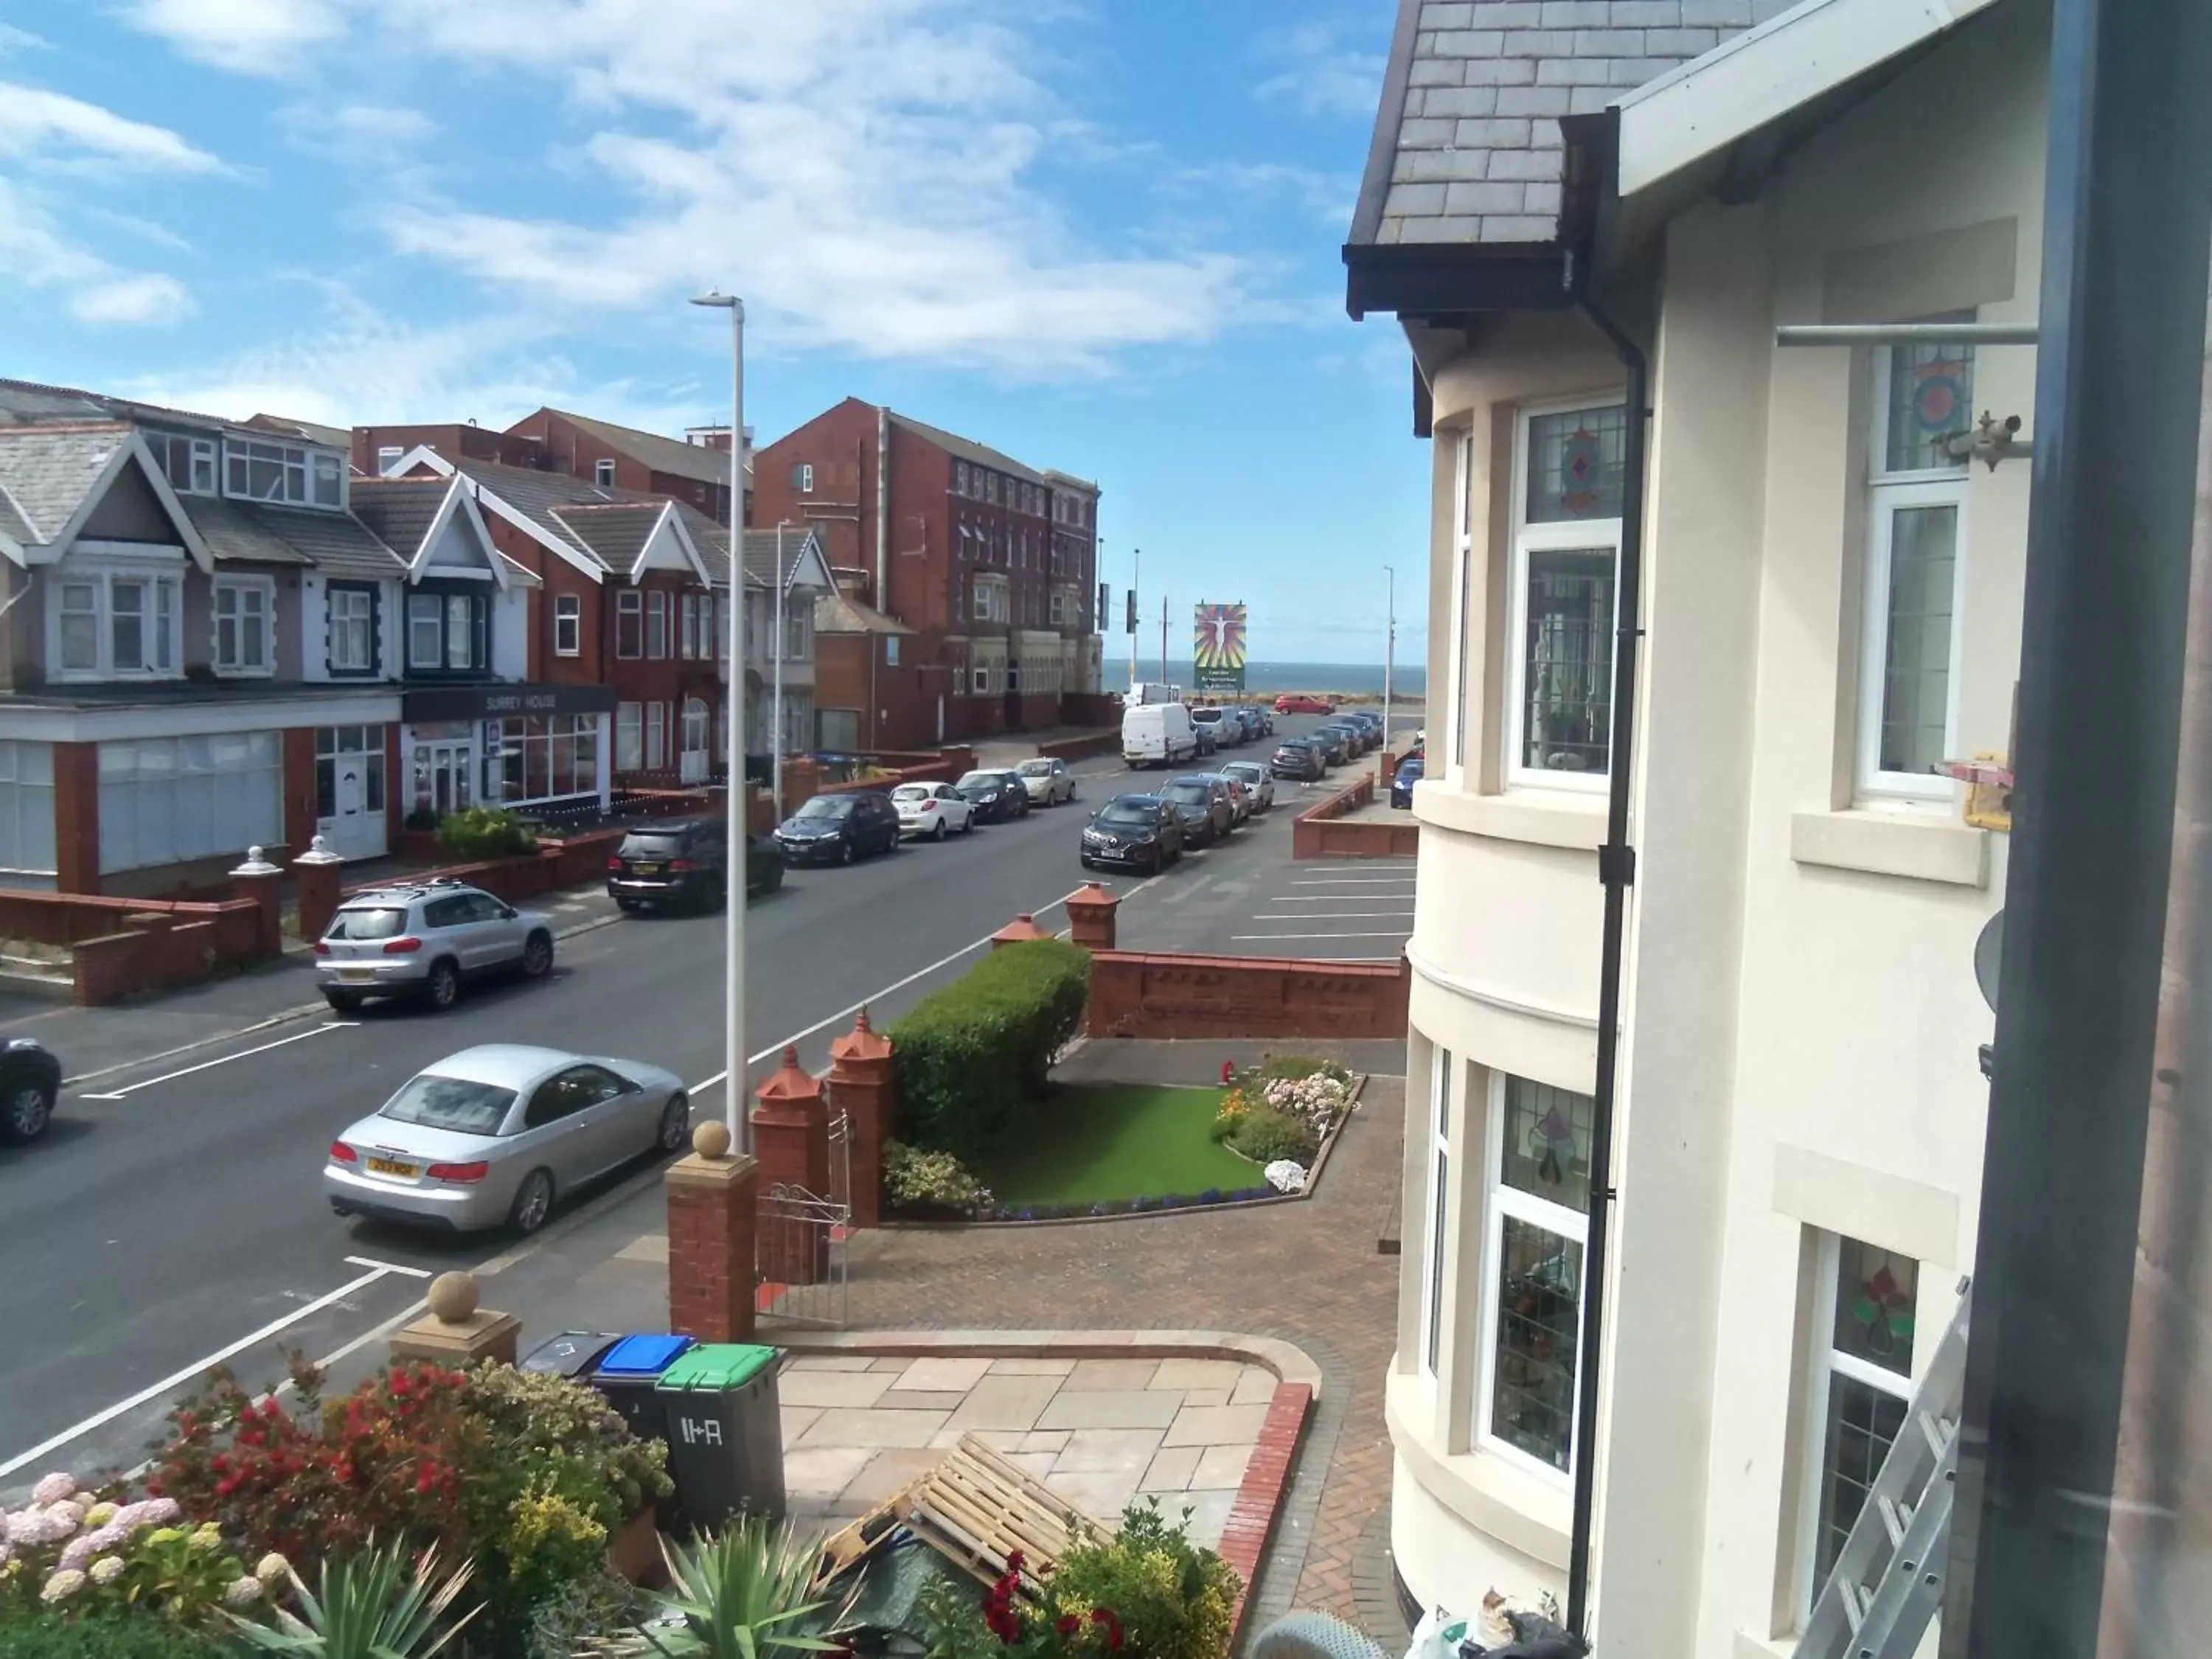 Sea view in The Sefton Blackpool